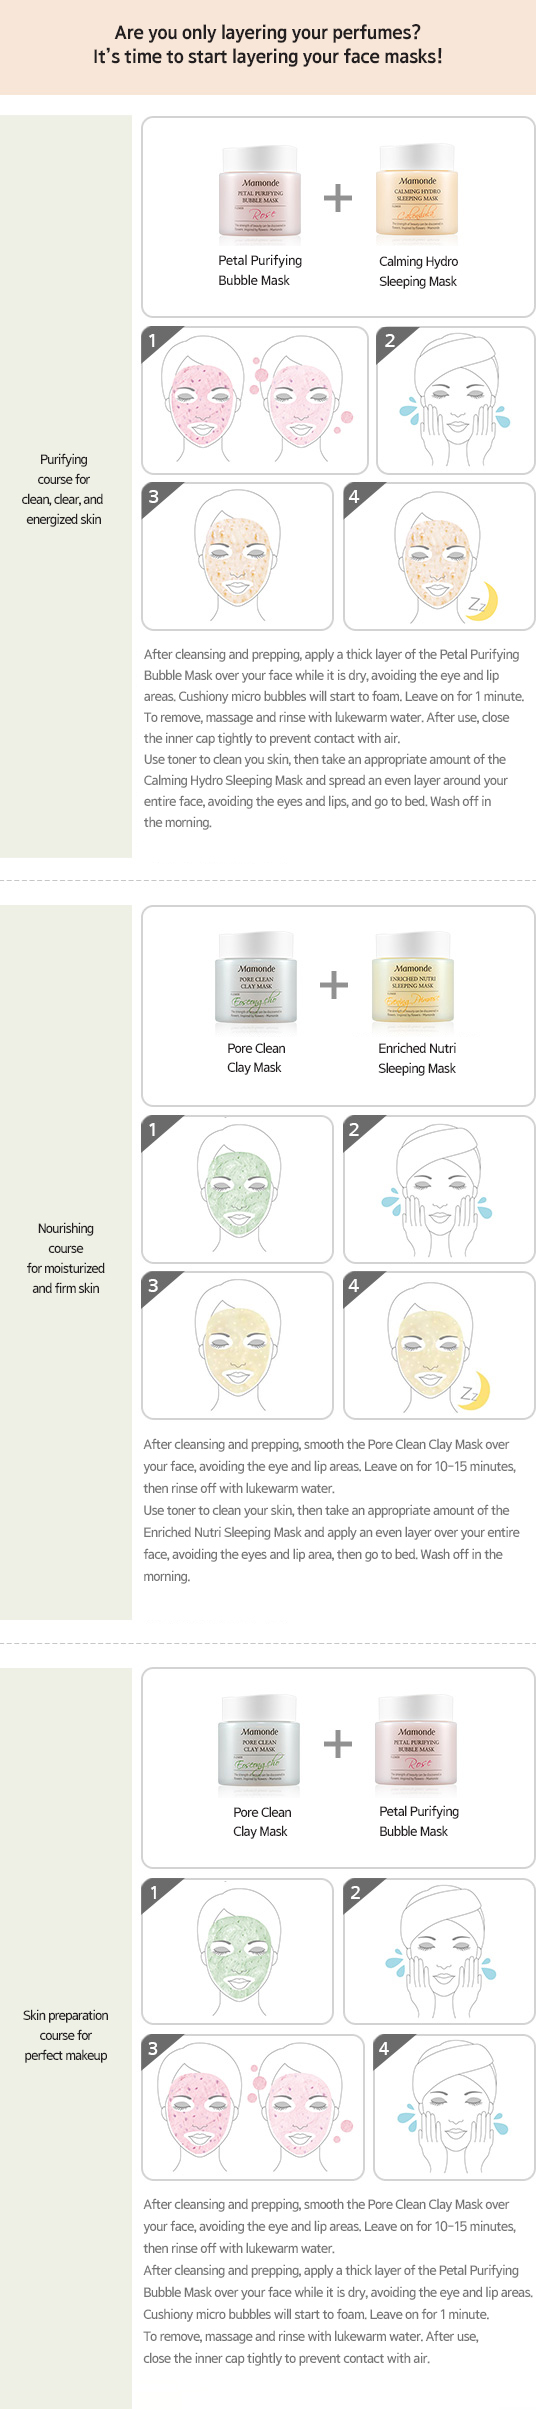 layering your face masks